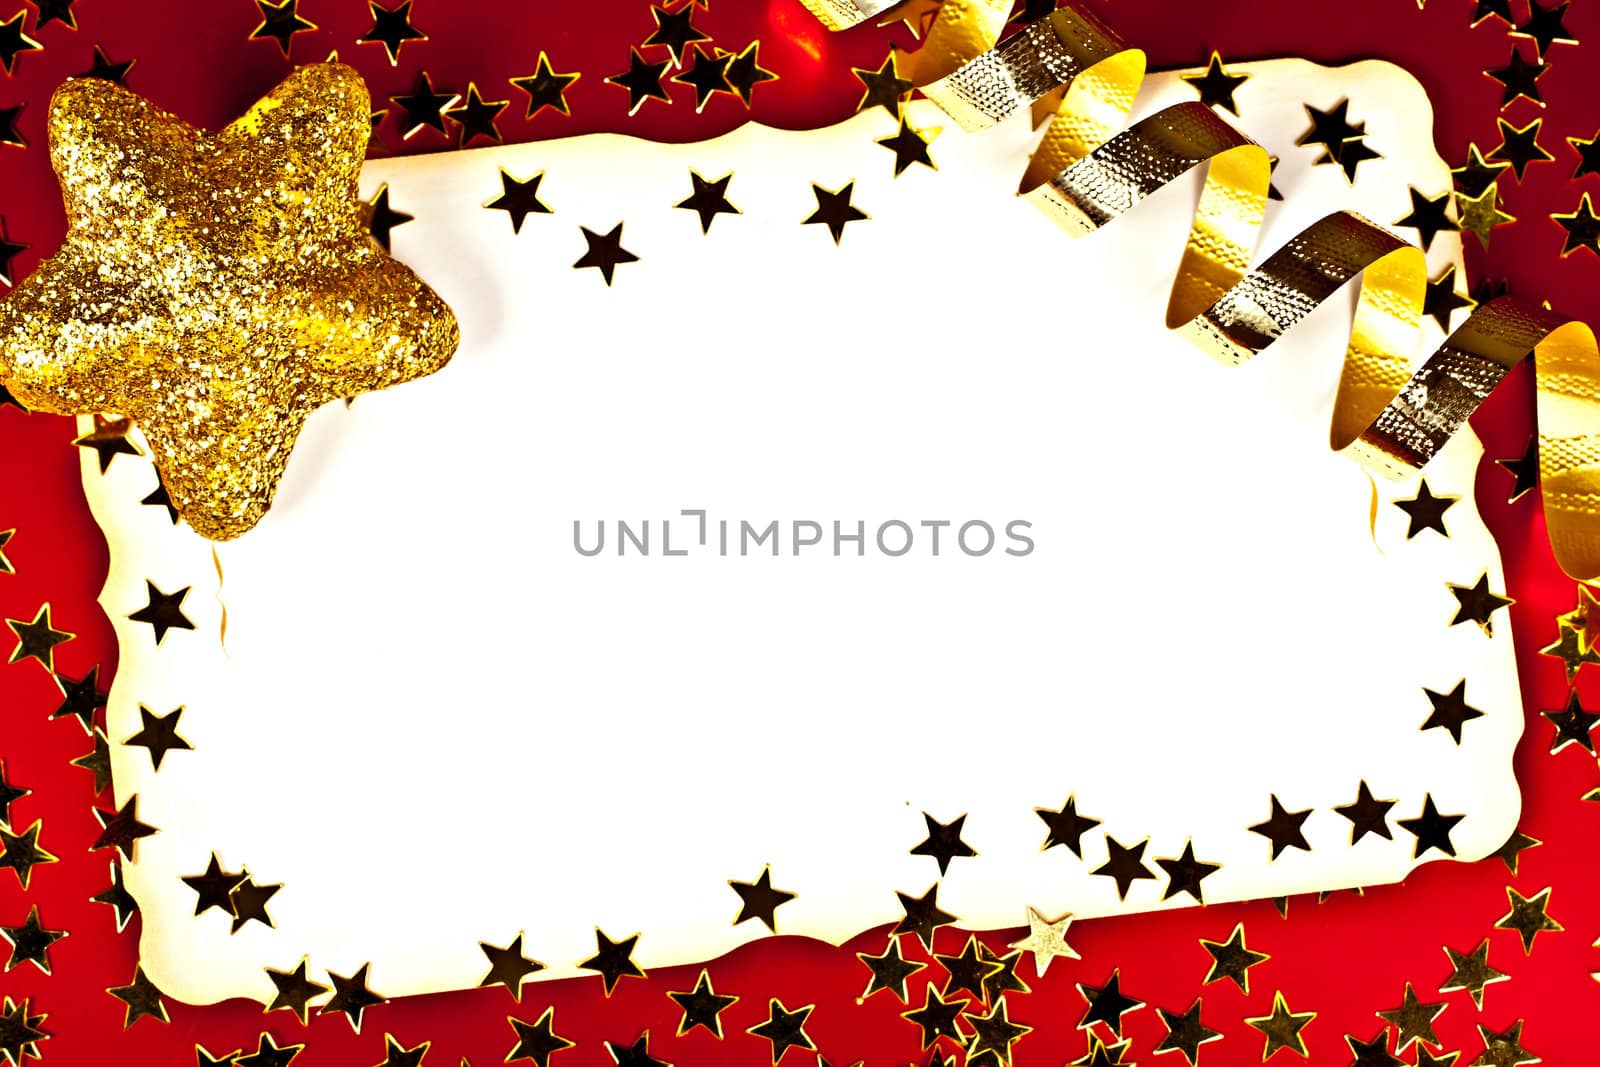 On a red background white greeting card with golden stars.